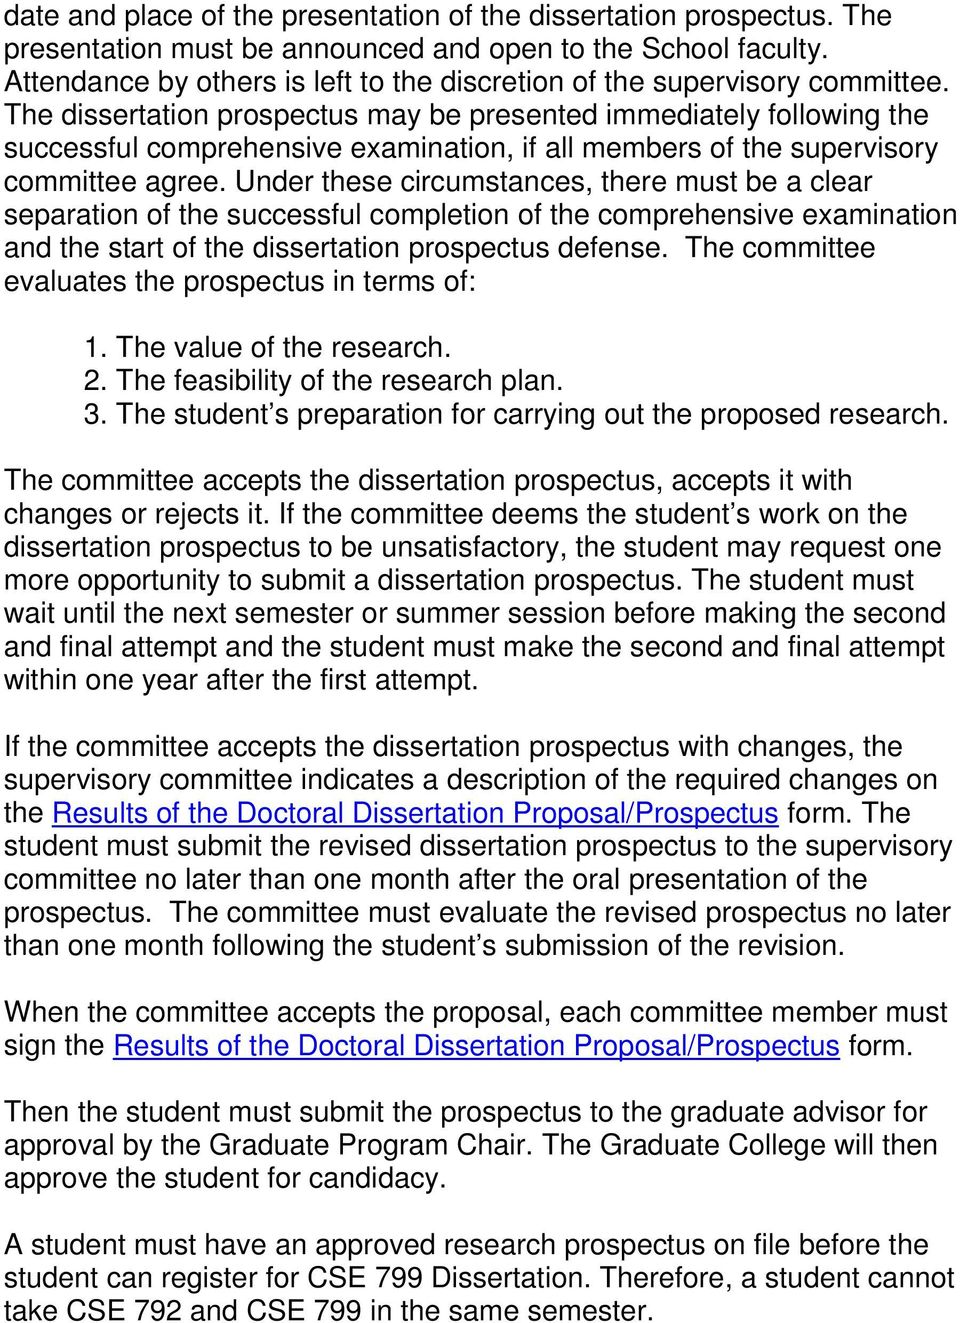 The dissertation prospectus may be presented immediately following the successful comprehensive examination, if all members of the supervisory committee agree.